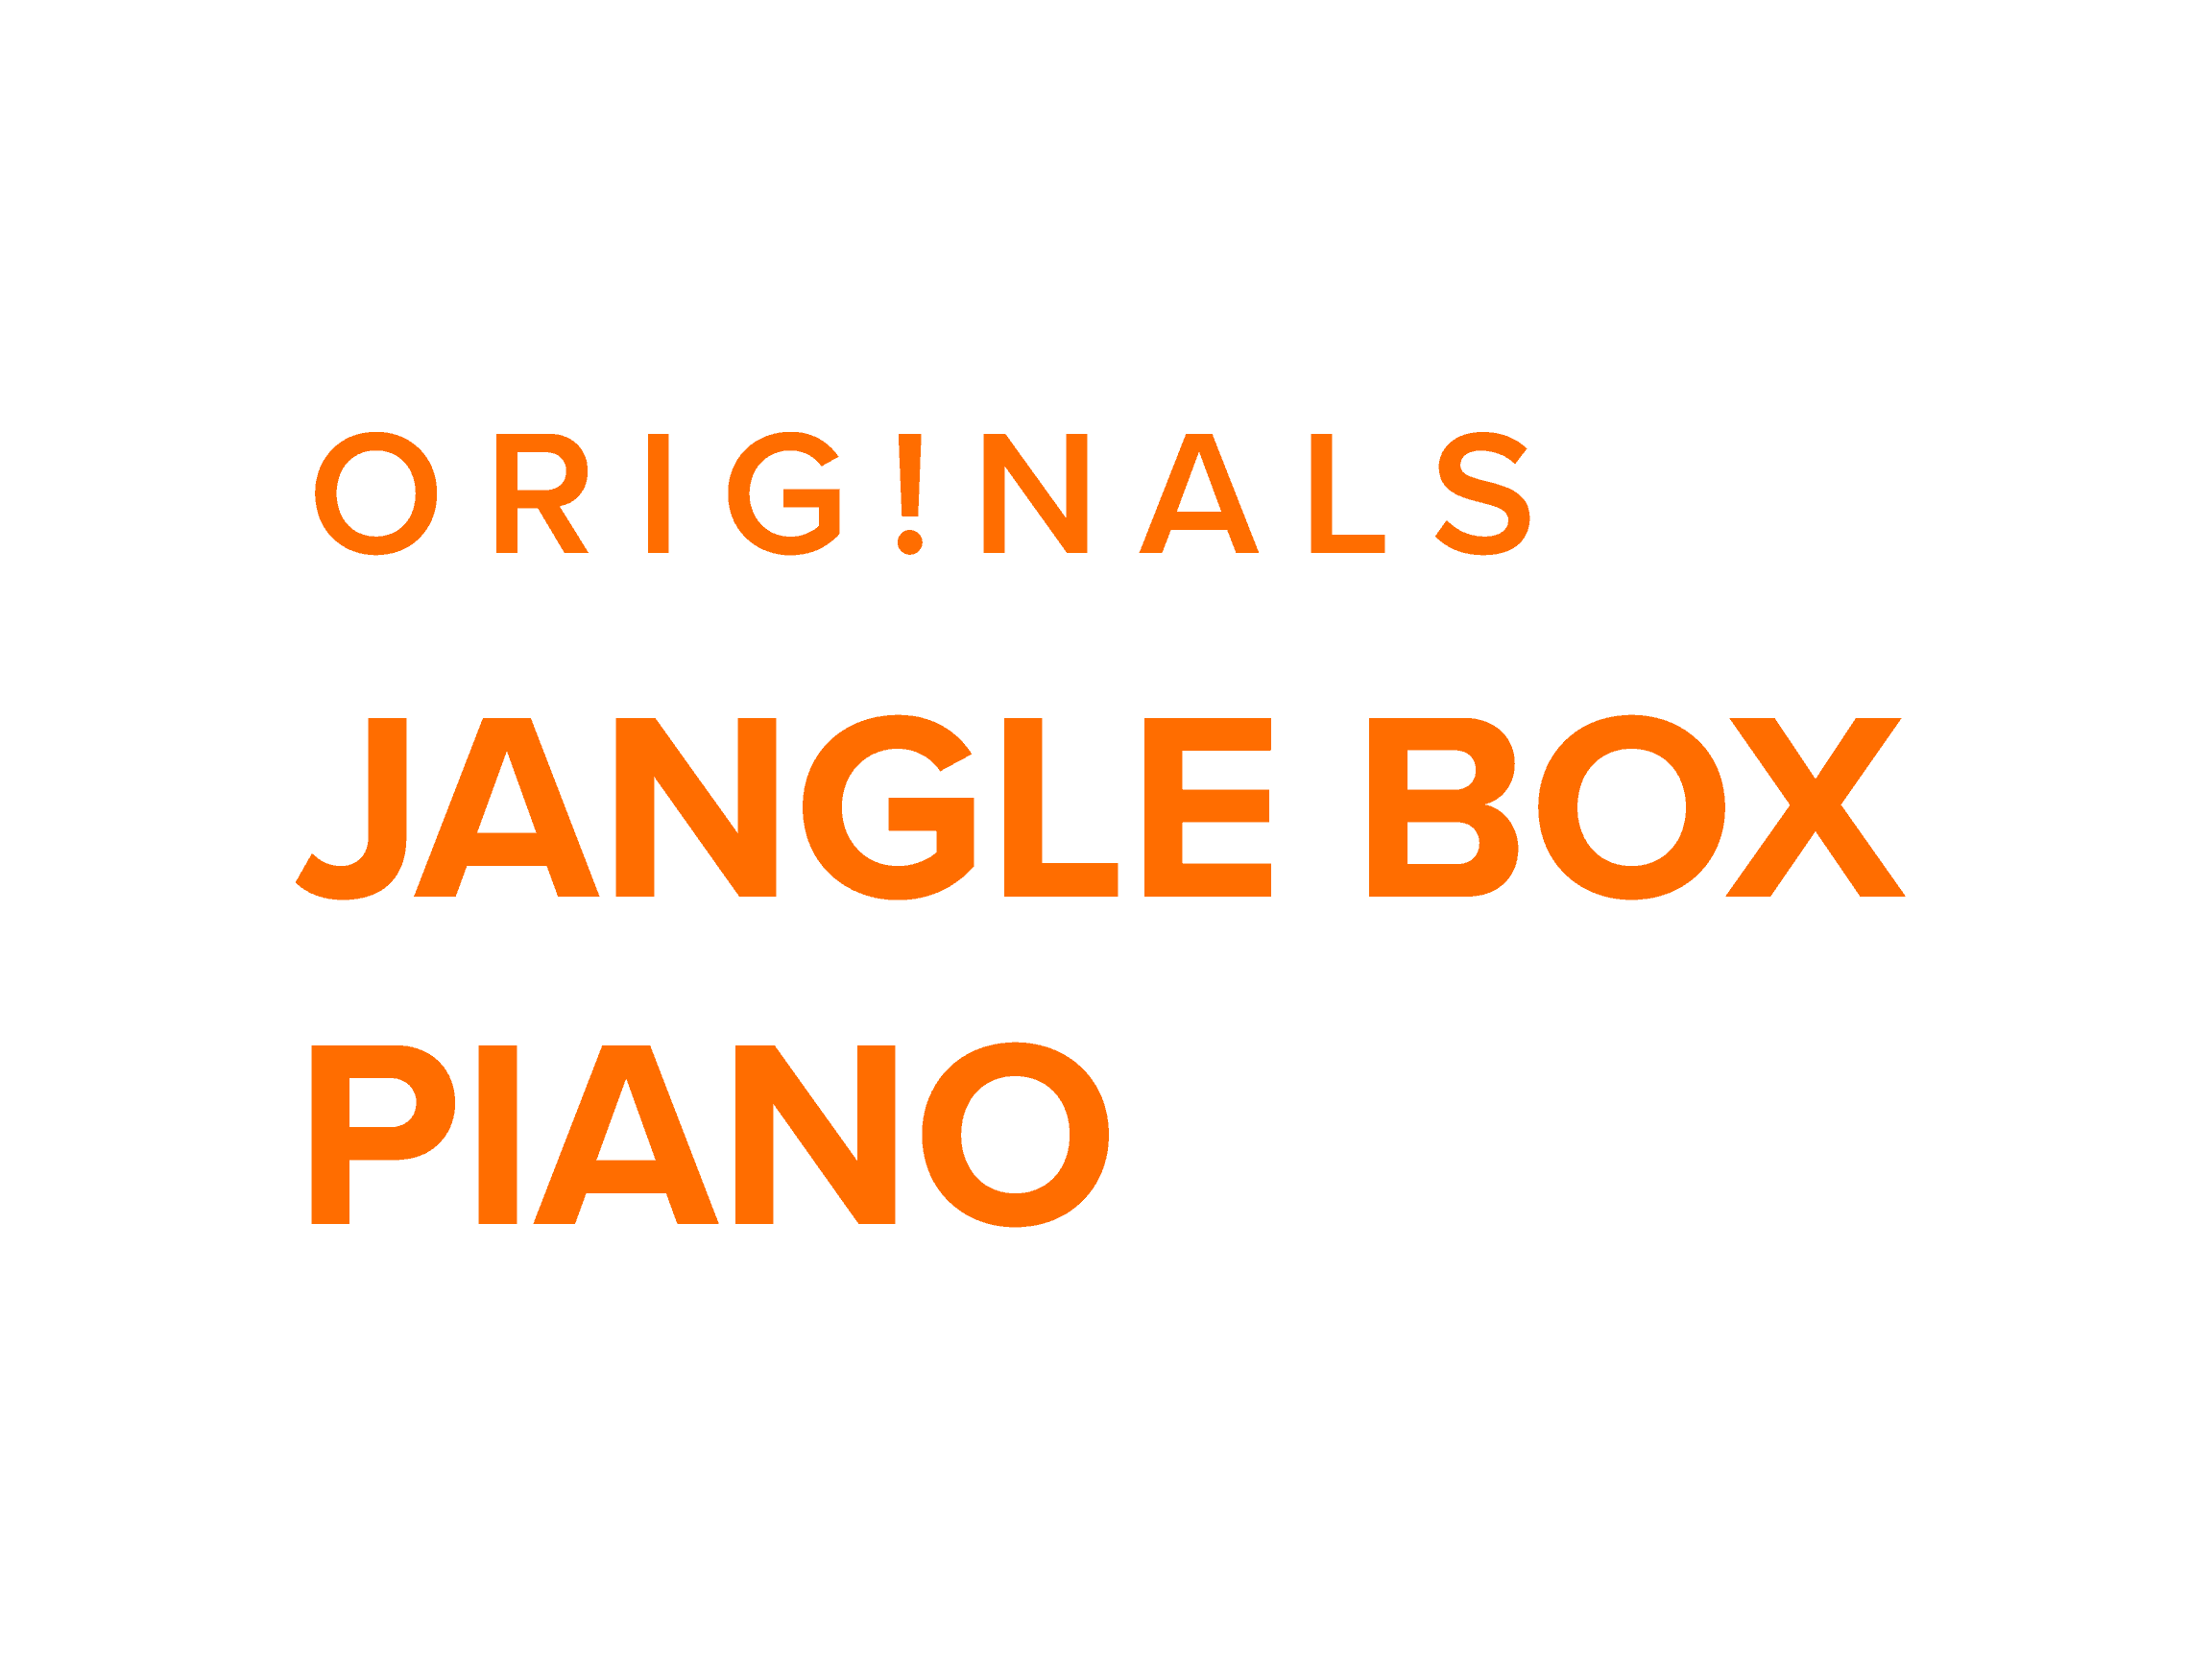 JANGLE BOX PIANO the Latest Addition to Spitfires Essential Cinematic Ingredients Line